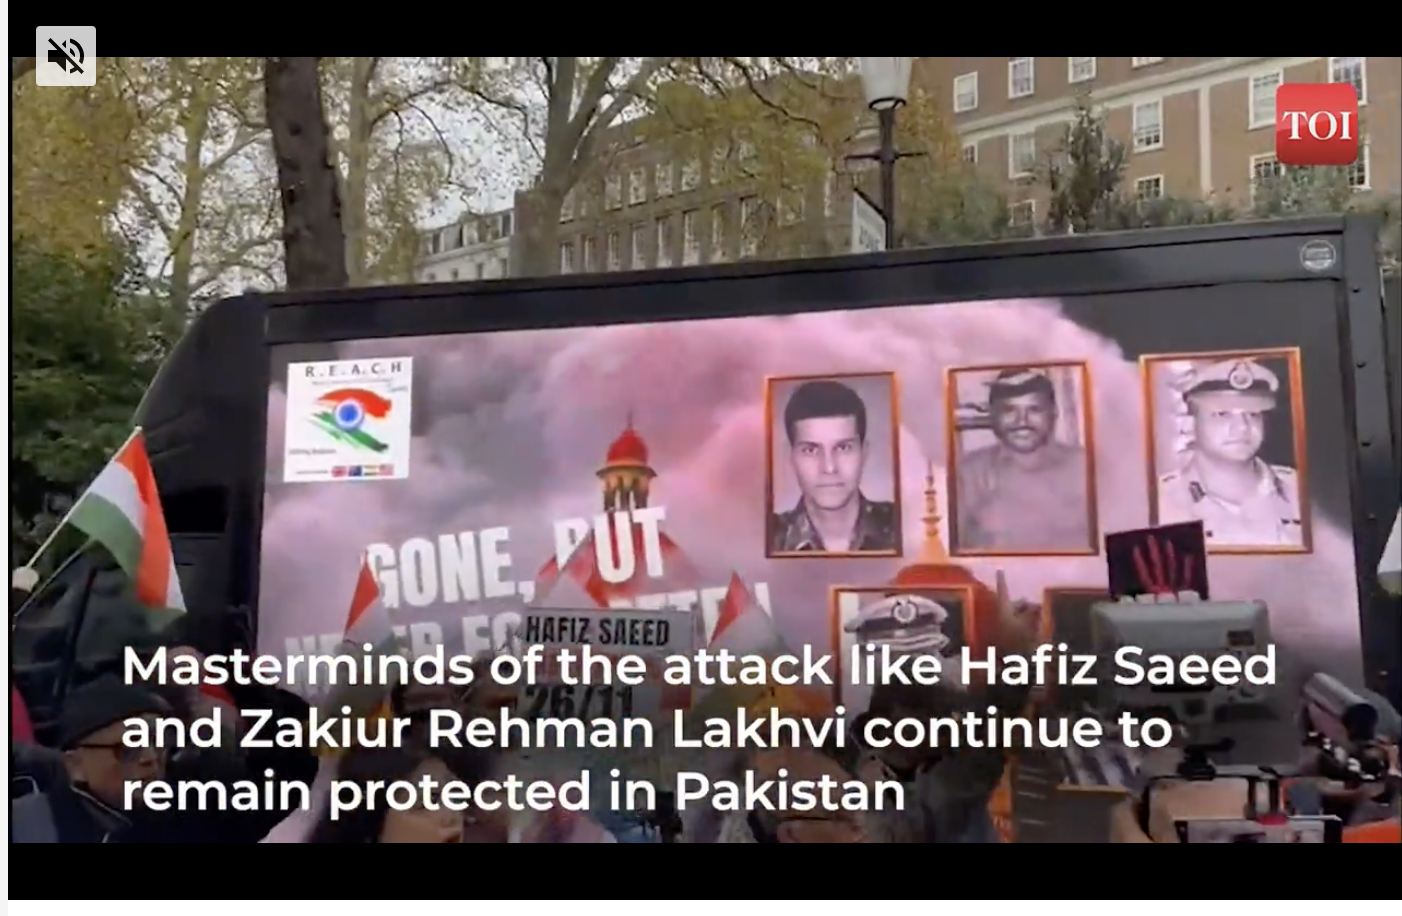 British Indians protest outside Pakistan High Commission on 26/11 anniversary